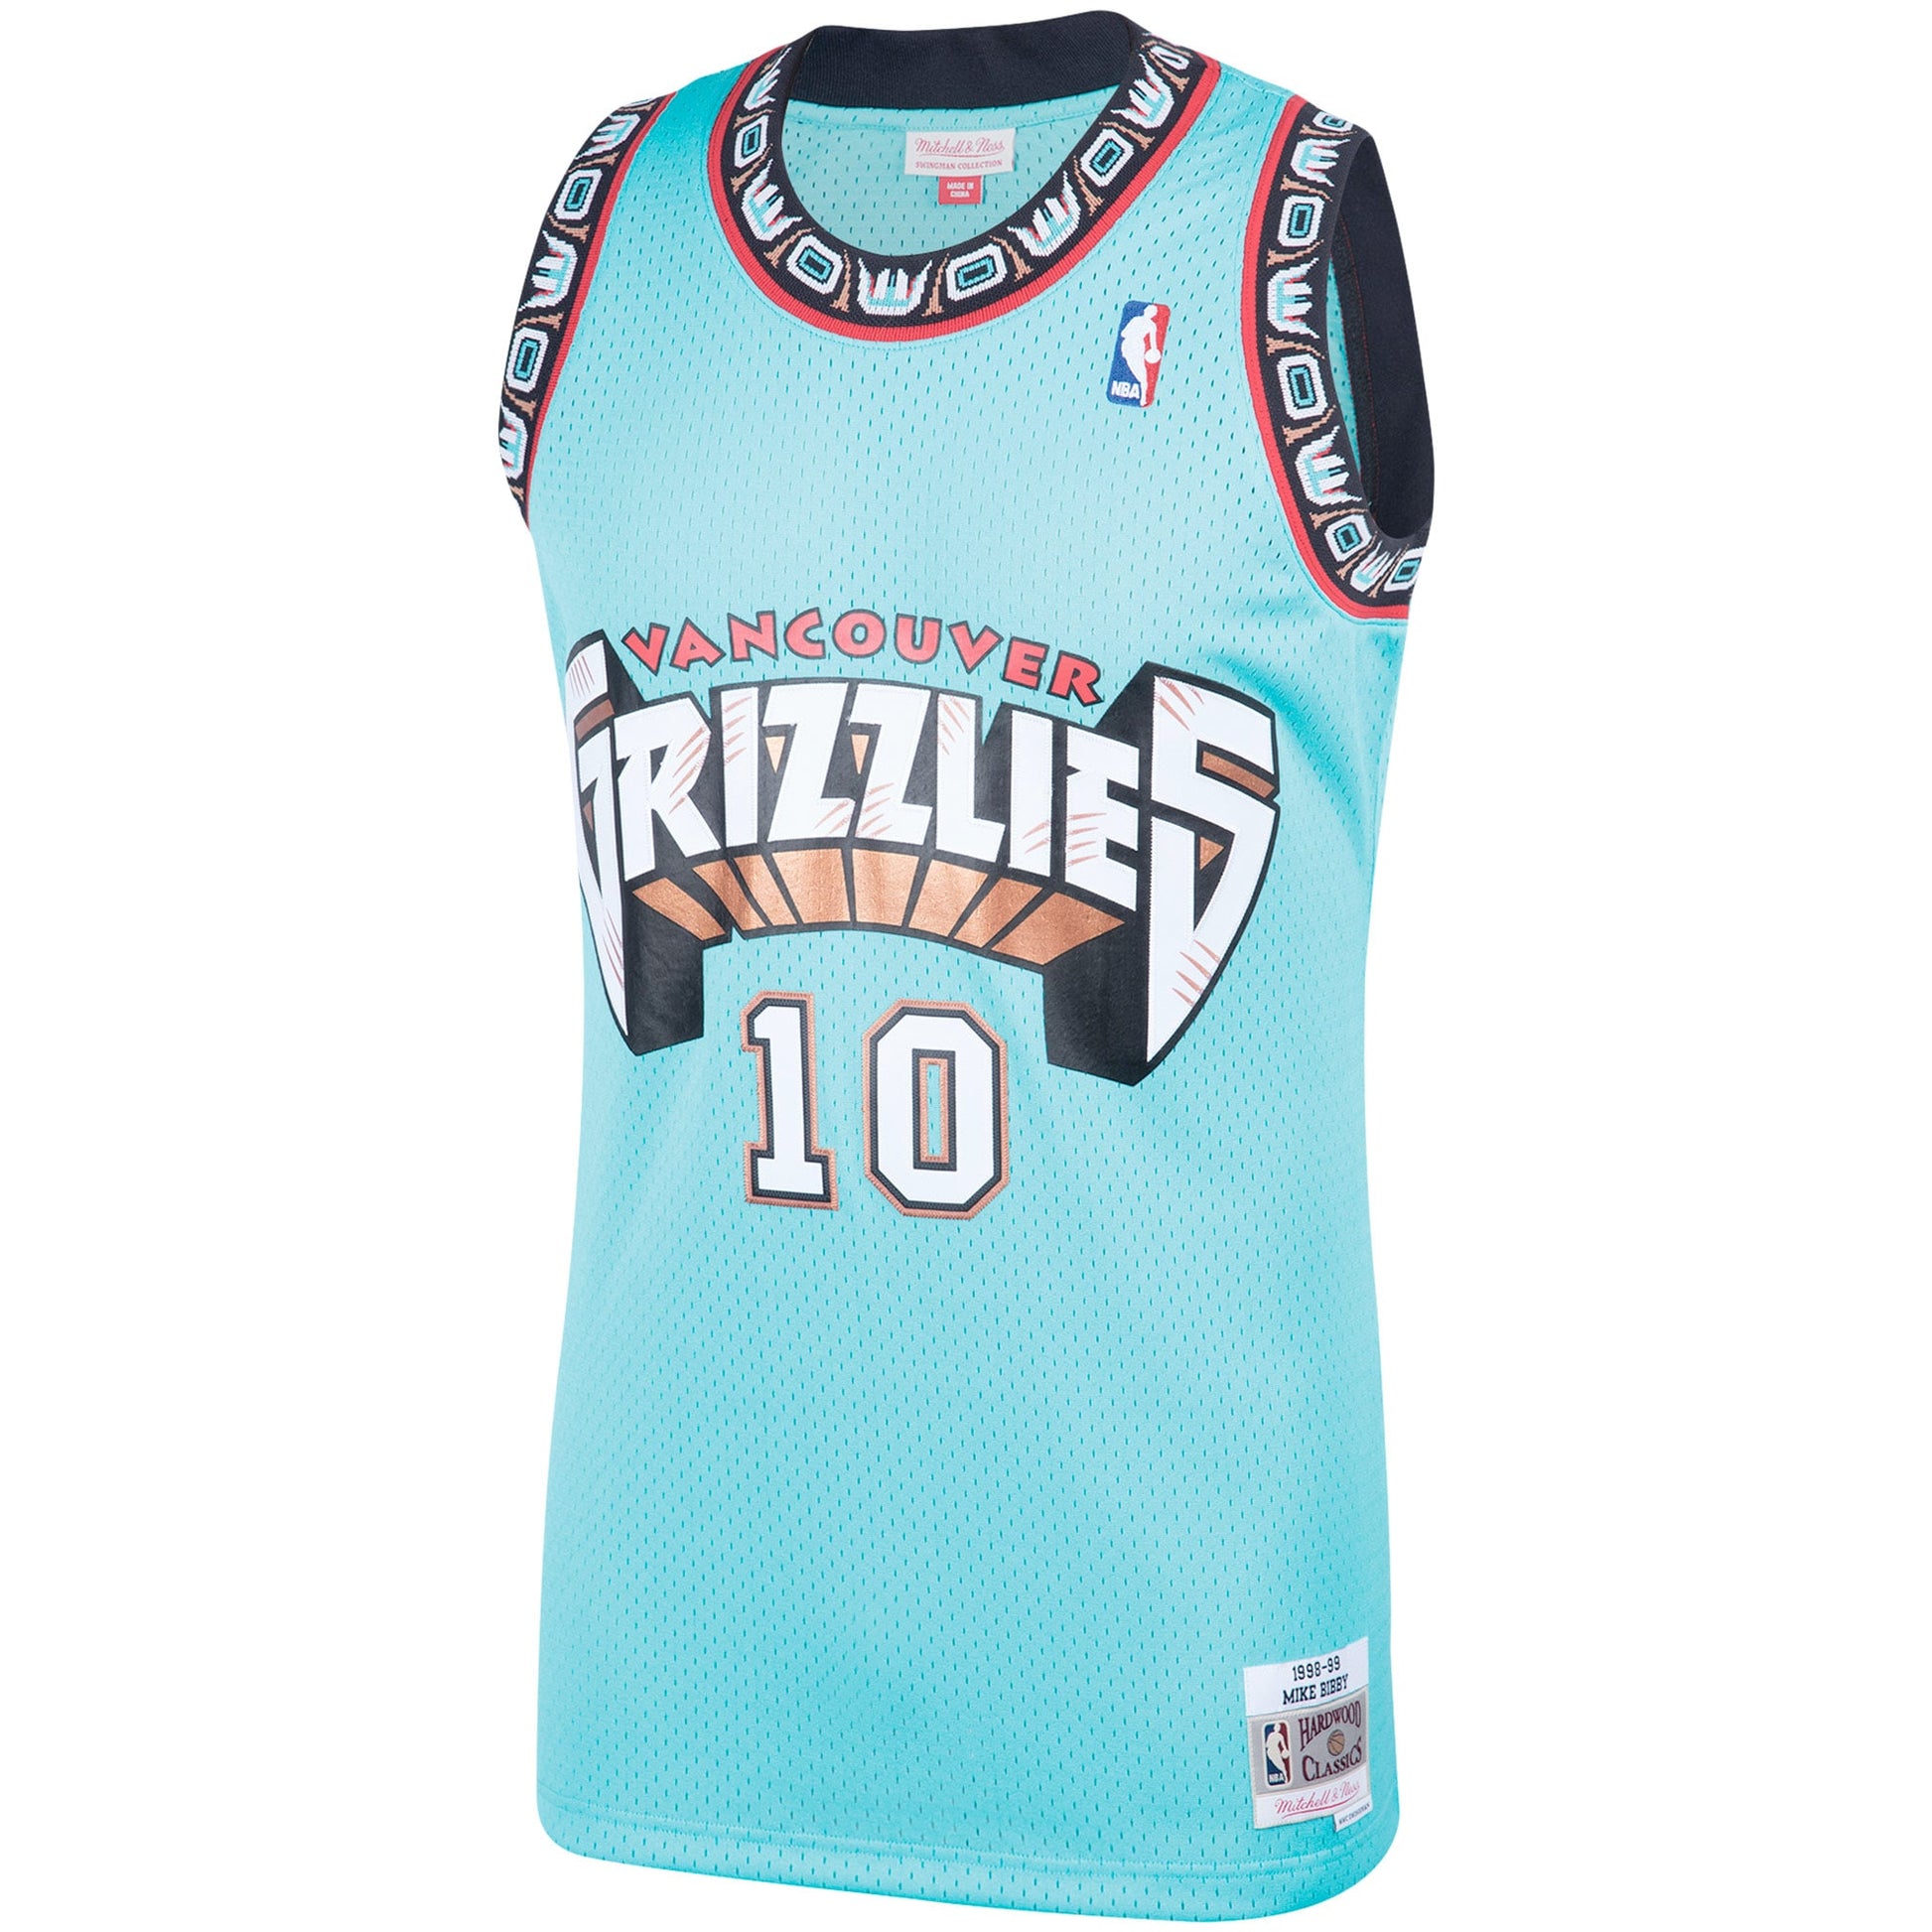 Mike Bibby Vancouver Grizzlies Mitchell & Ness 1998-99 Hardwood